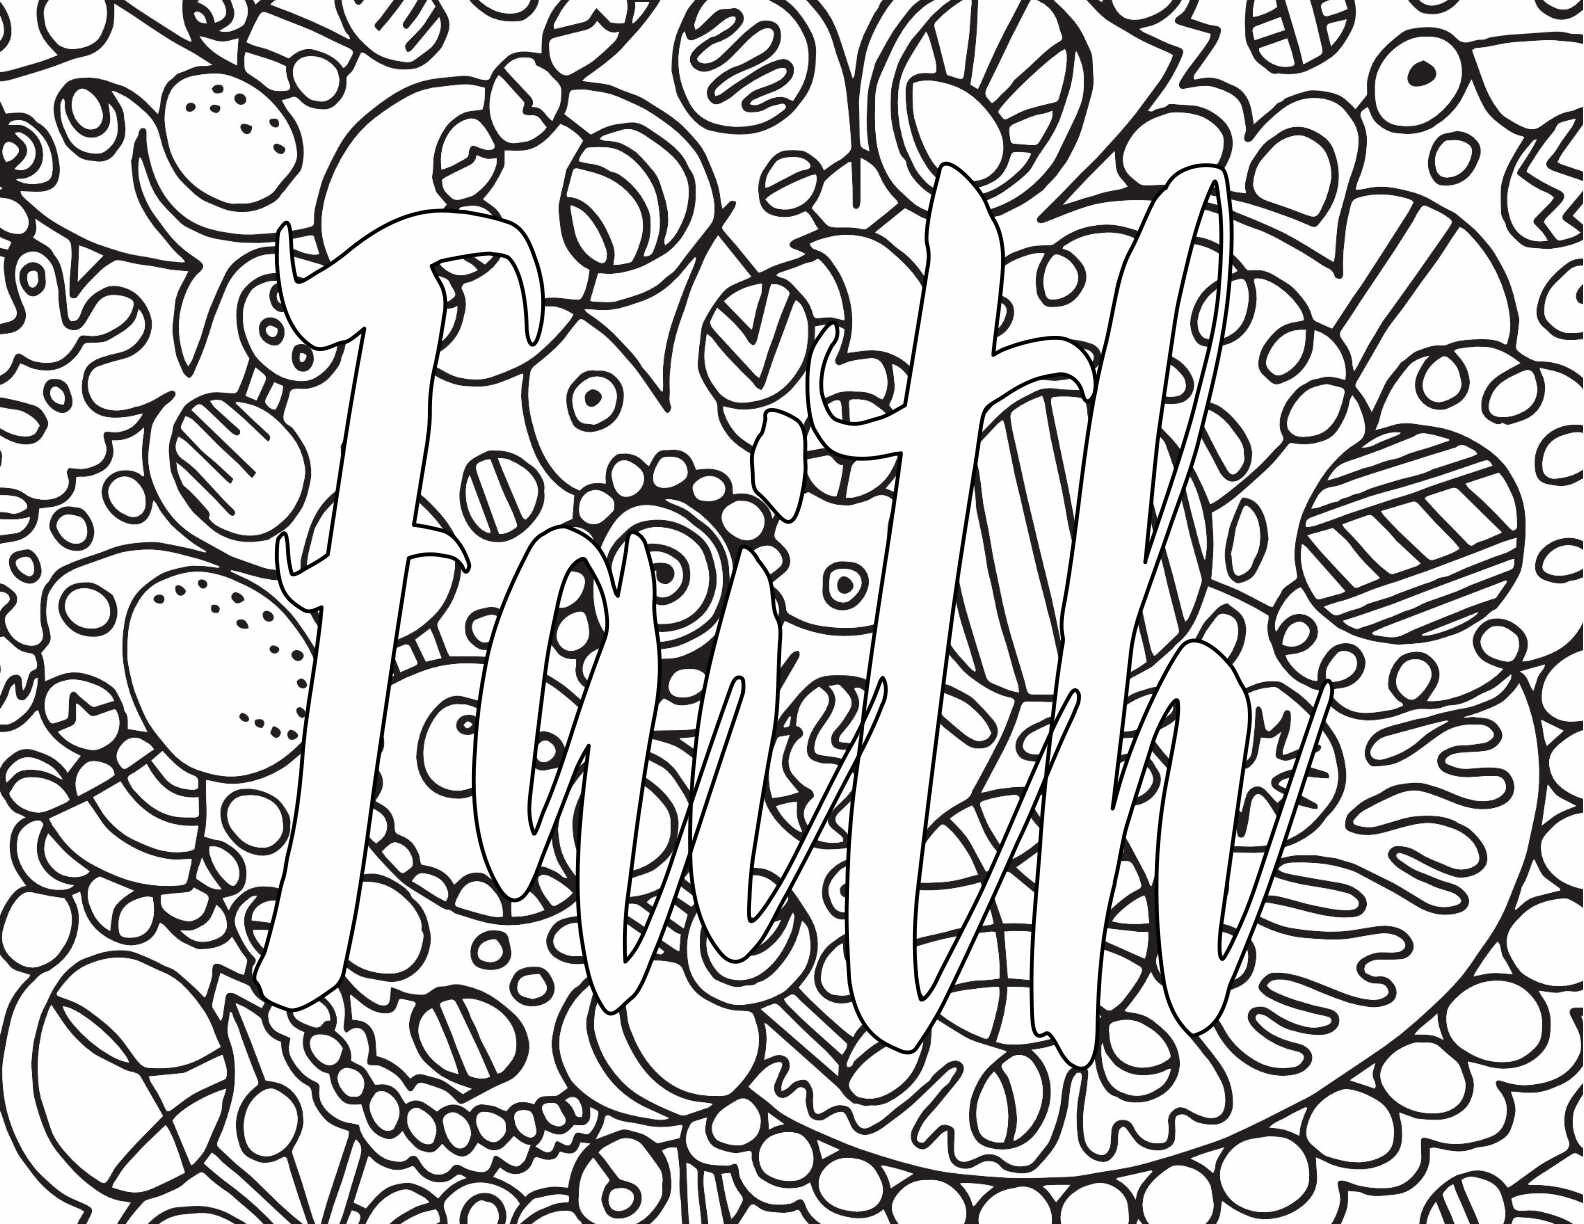 3 Free FAITH Printable Coloring PagesCLICK HERE TO DOWNLOAD THE PAGE ABOVE